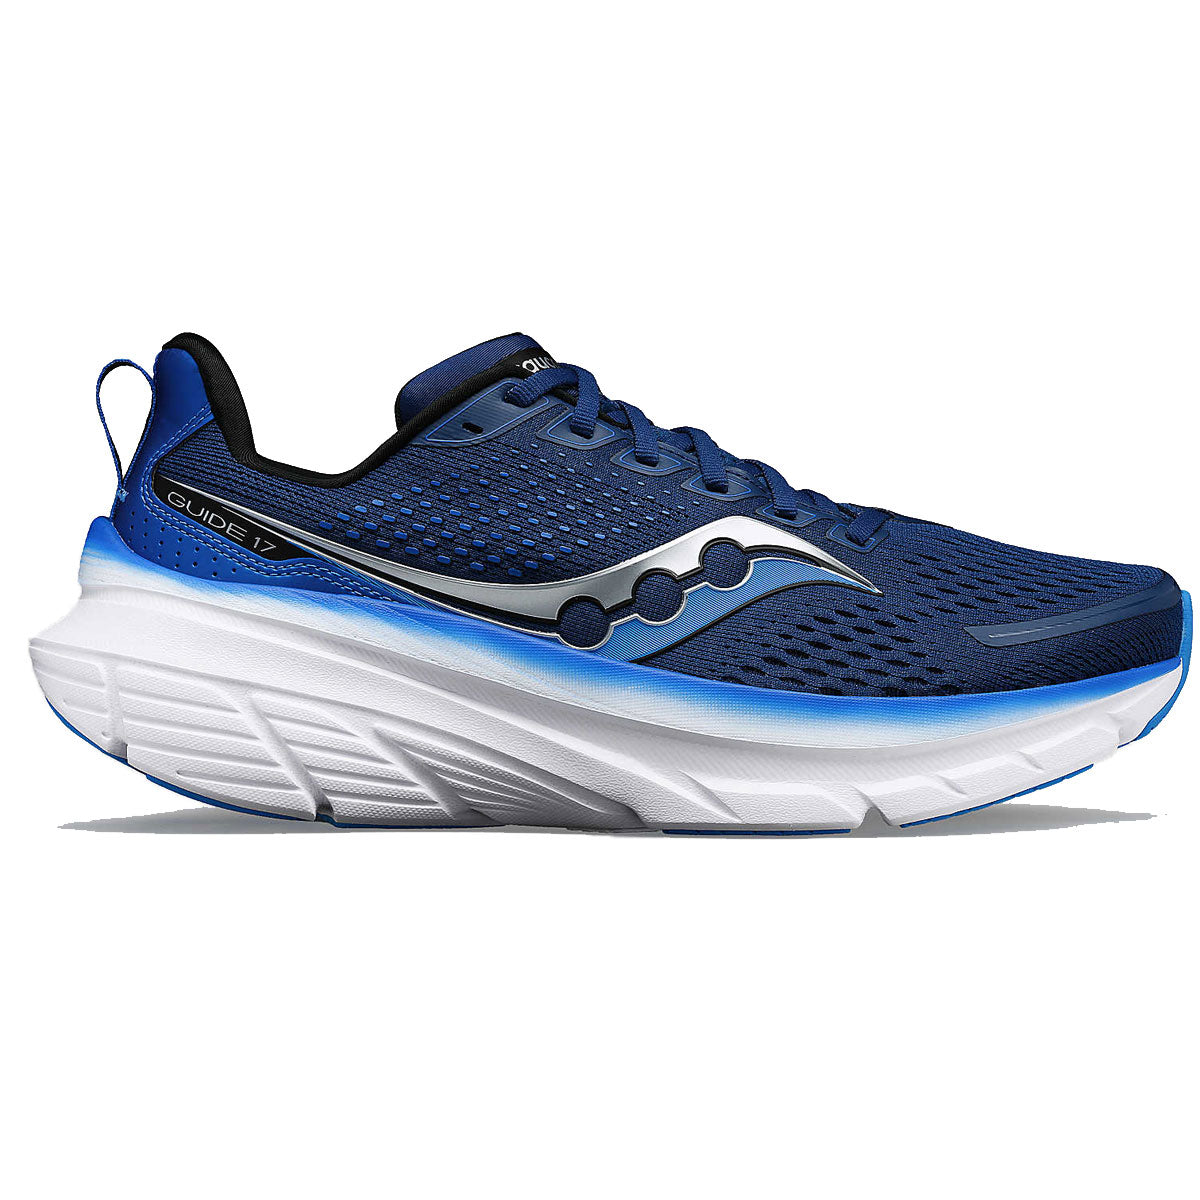 Saucony Guide 17 Running Shoes - Mens - Navy/Cobalt